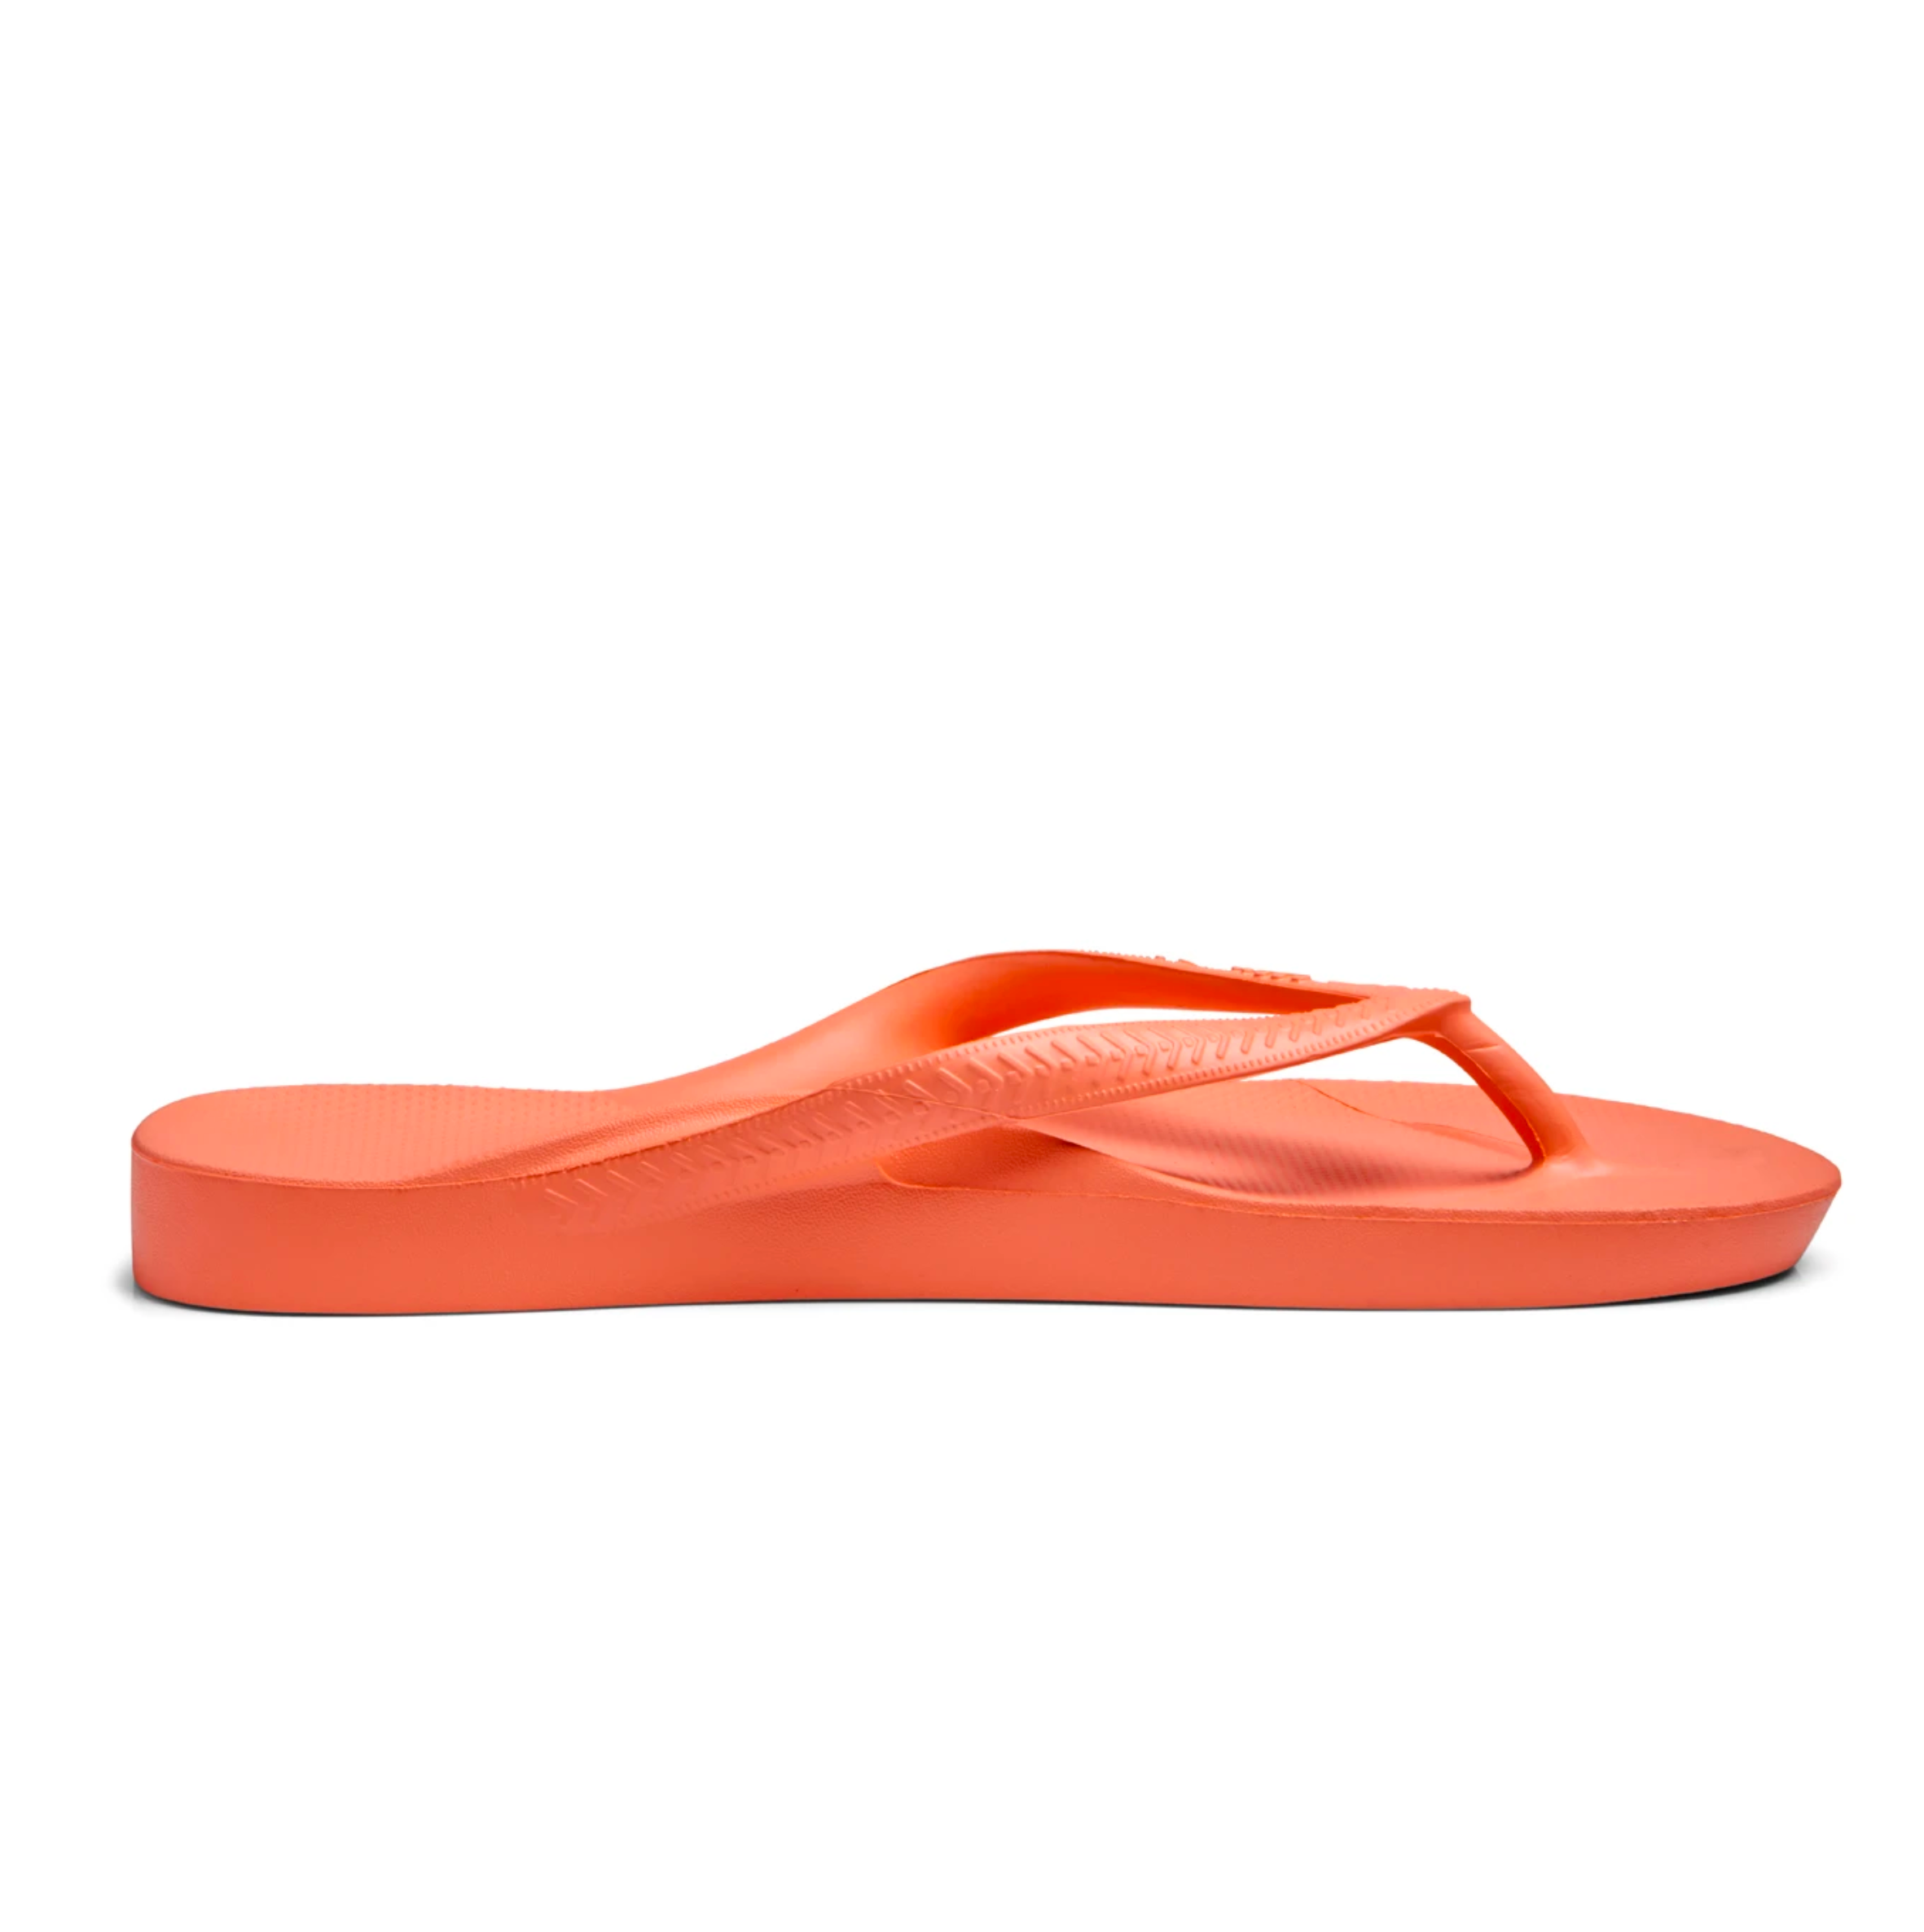 PEACH ARCHIES ARCH SUPPORT THONGS – Noosa Footwear Co.